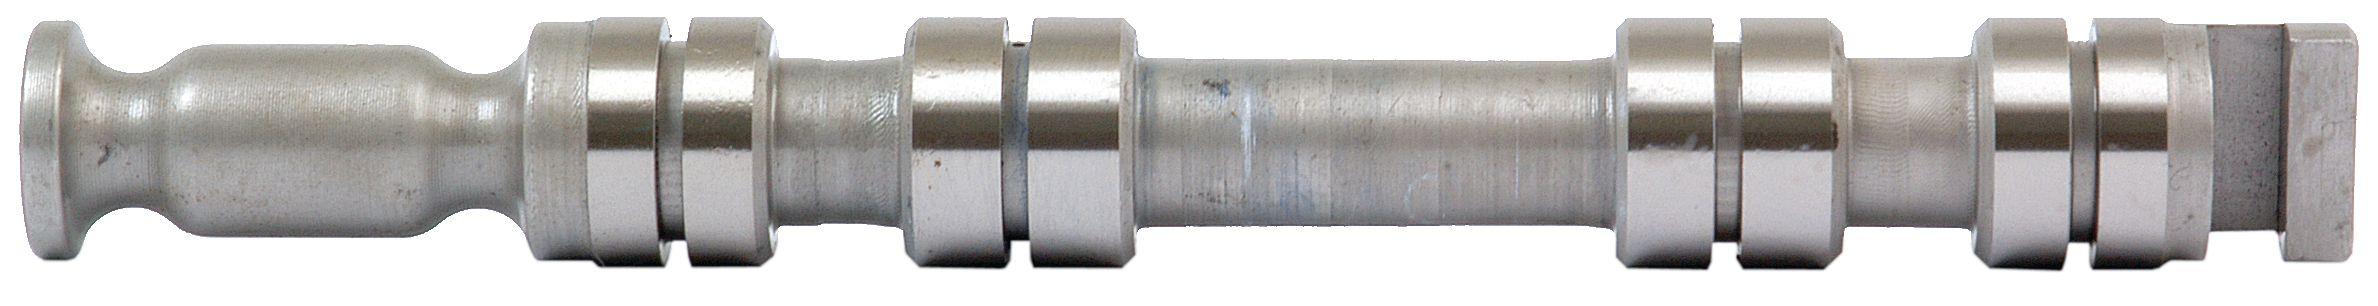 FORD NEW HOLLAND VALVE SPINDLE-BLUE/WHITE 17392